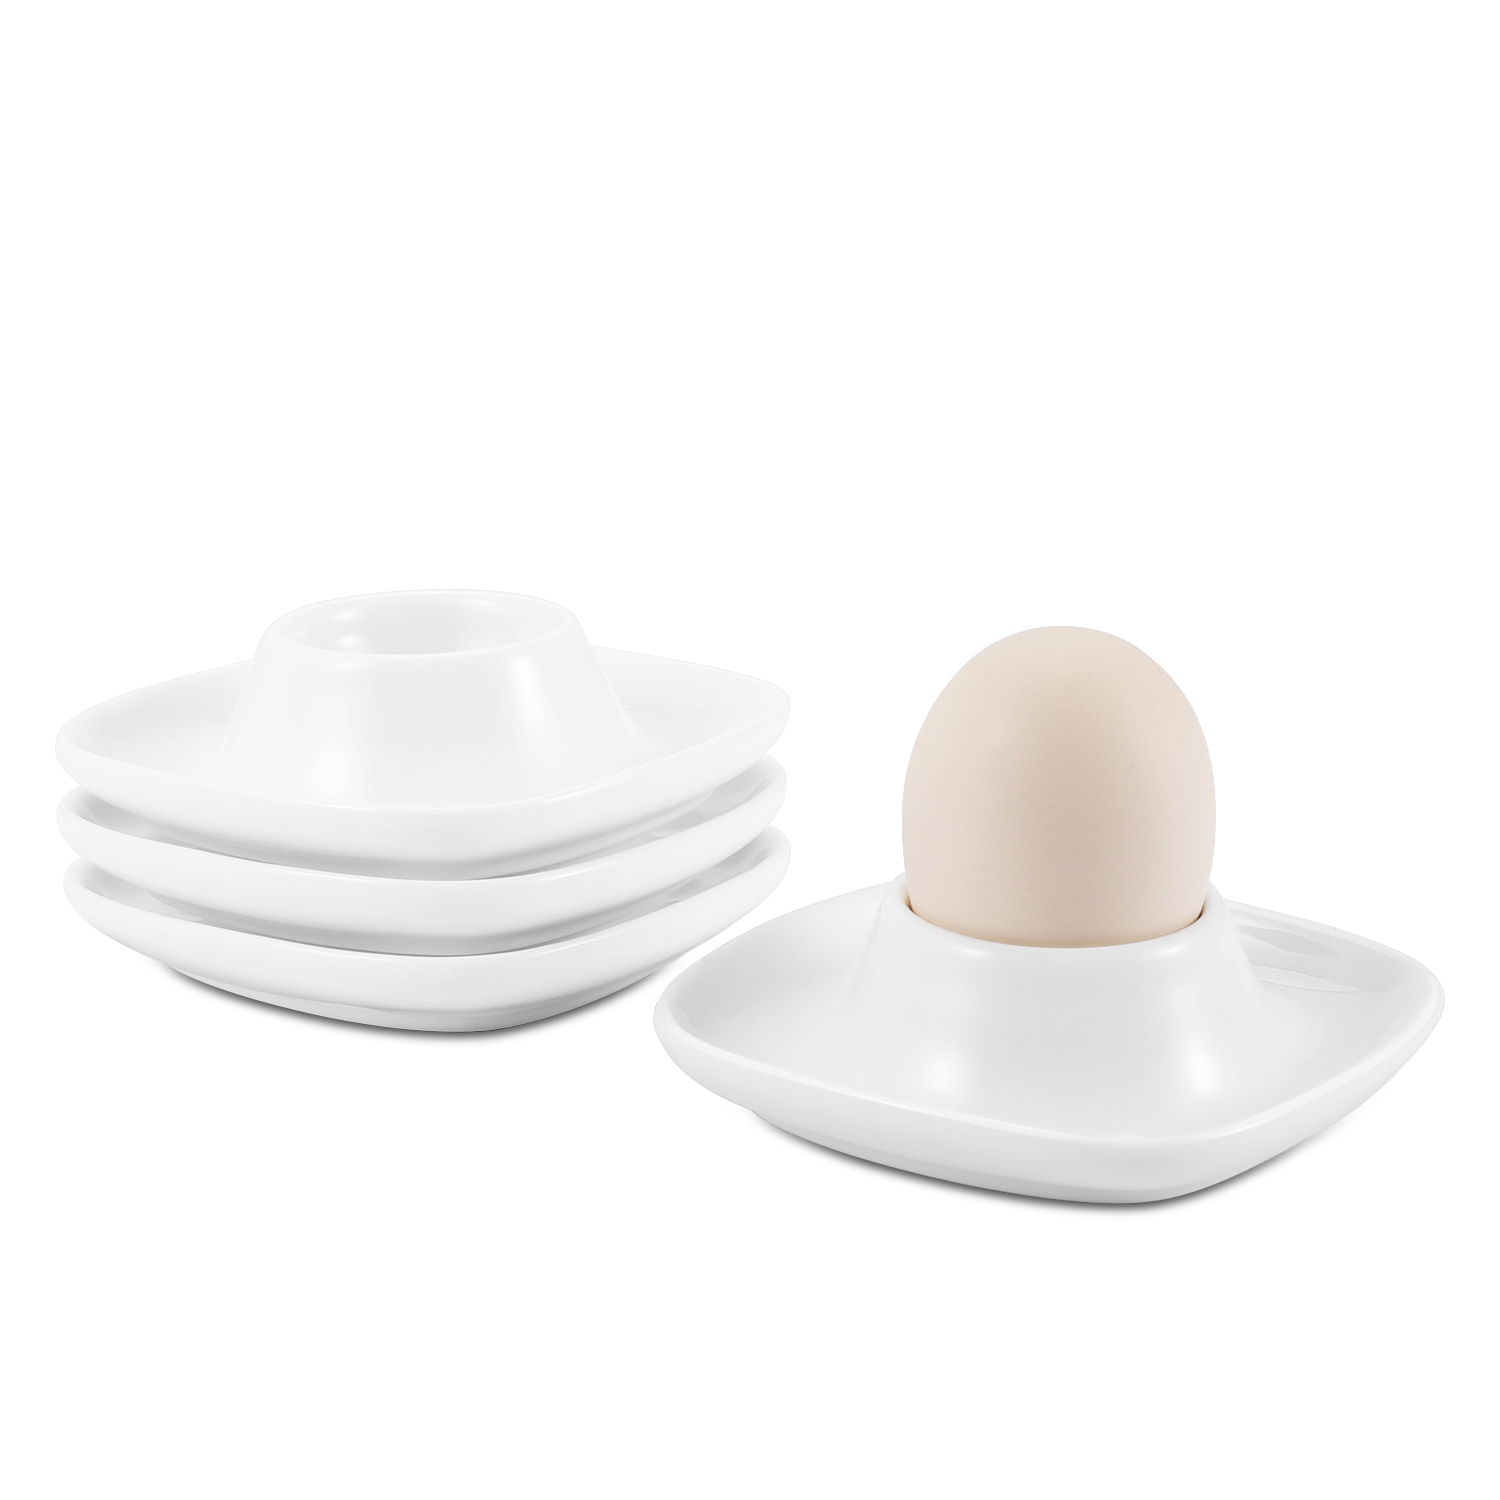 Ceramic Egg Cups Set of 4 Pack, Porcelain Hard Soft Boiled Egg Holder Keeper Container w/ Base, Stackable Serving Dish Plate Stand Serveware for Countertop Display Kitchen (White) - image 1 of 7